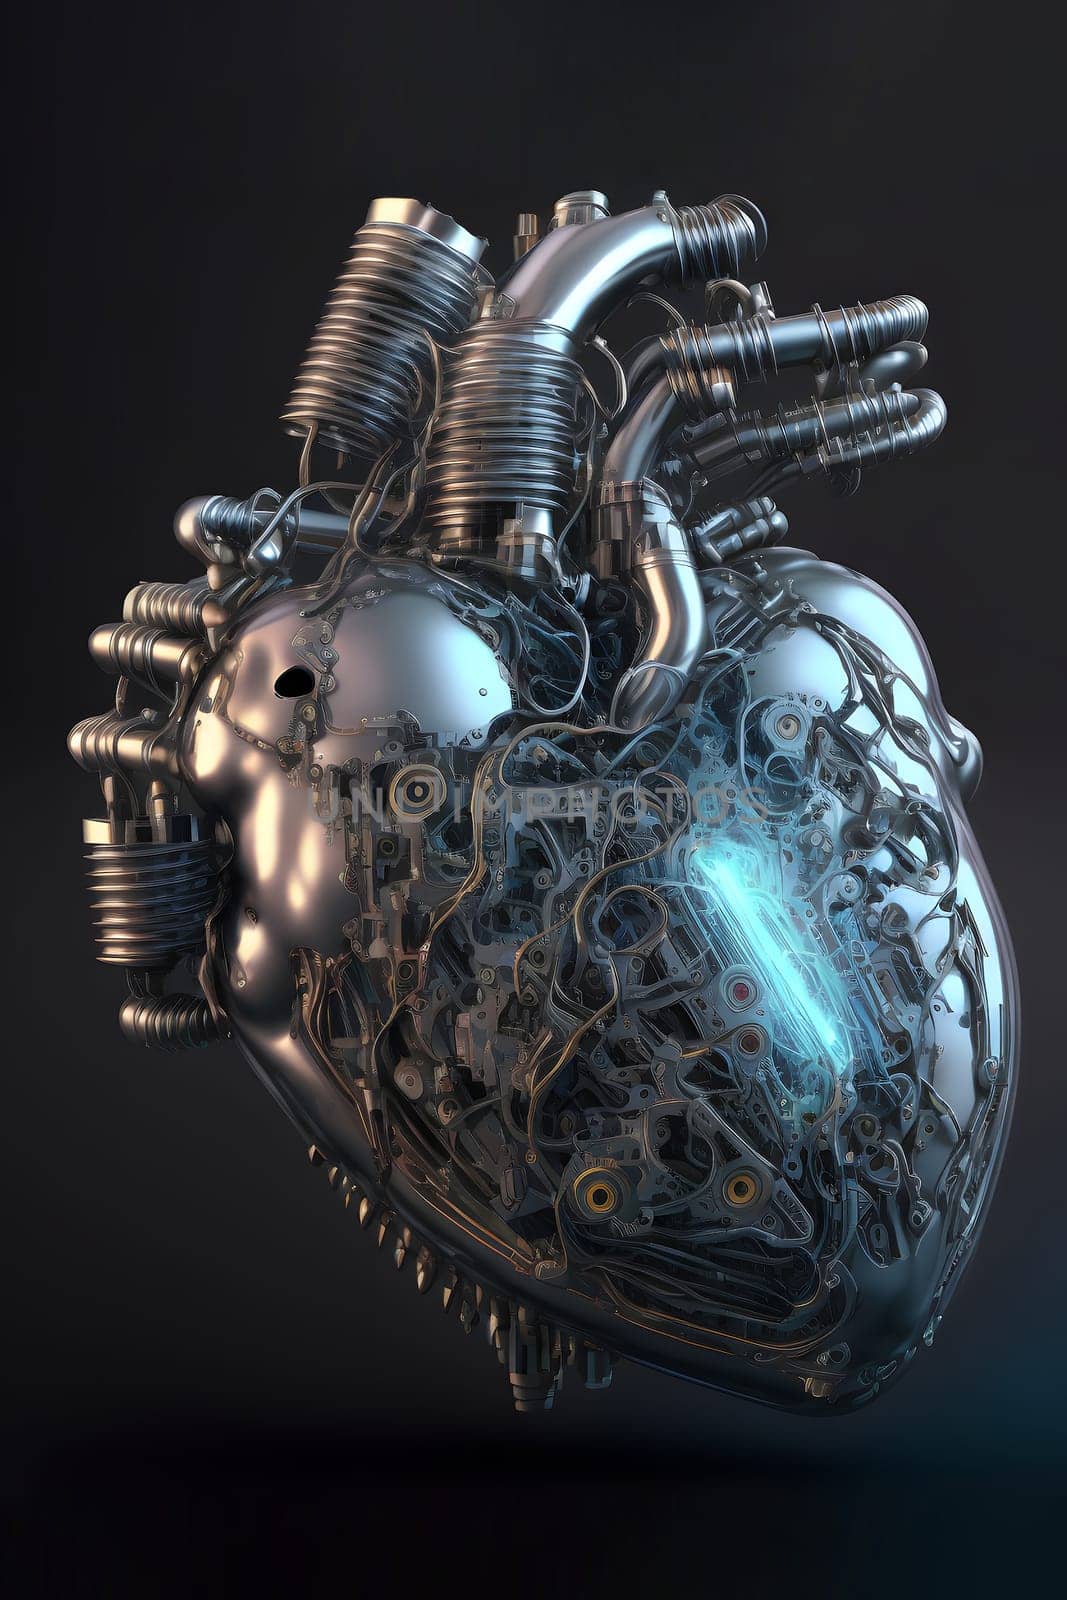 fantastic bionic heart, neural network generated art. Digitally generated image. Not based on any actual person, scene or pattern.